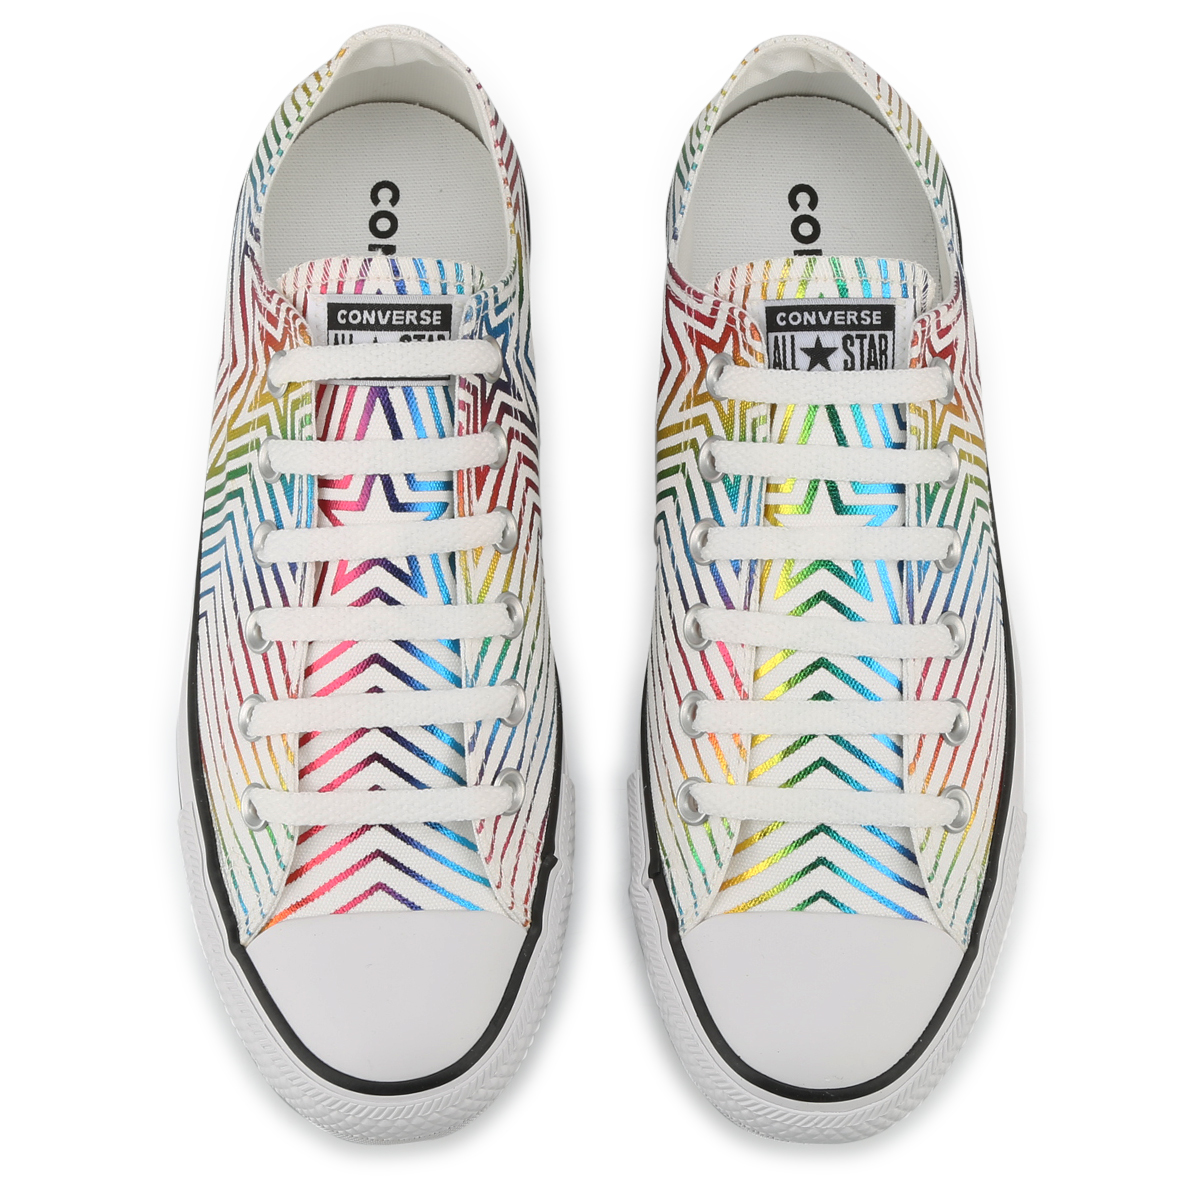 Zapatillas Converse Ct All Star Rainbow,  image number null